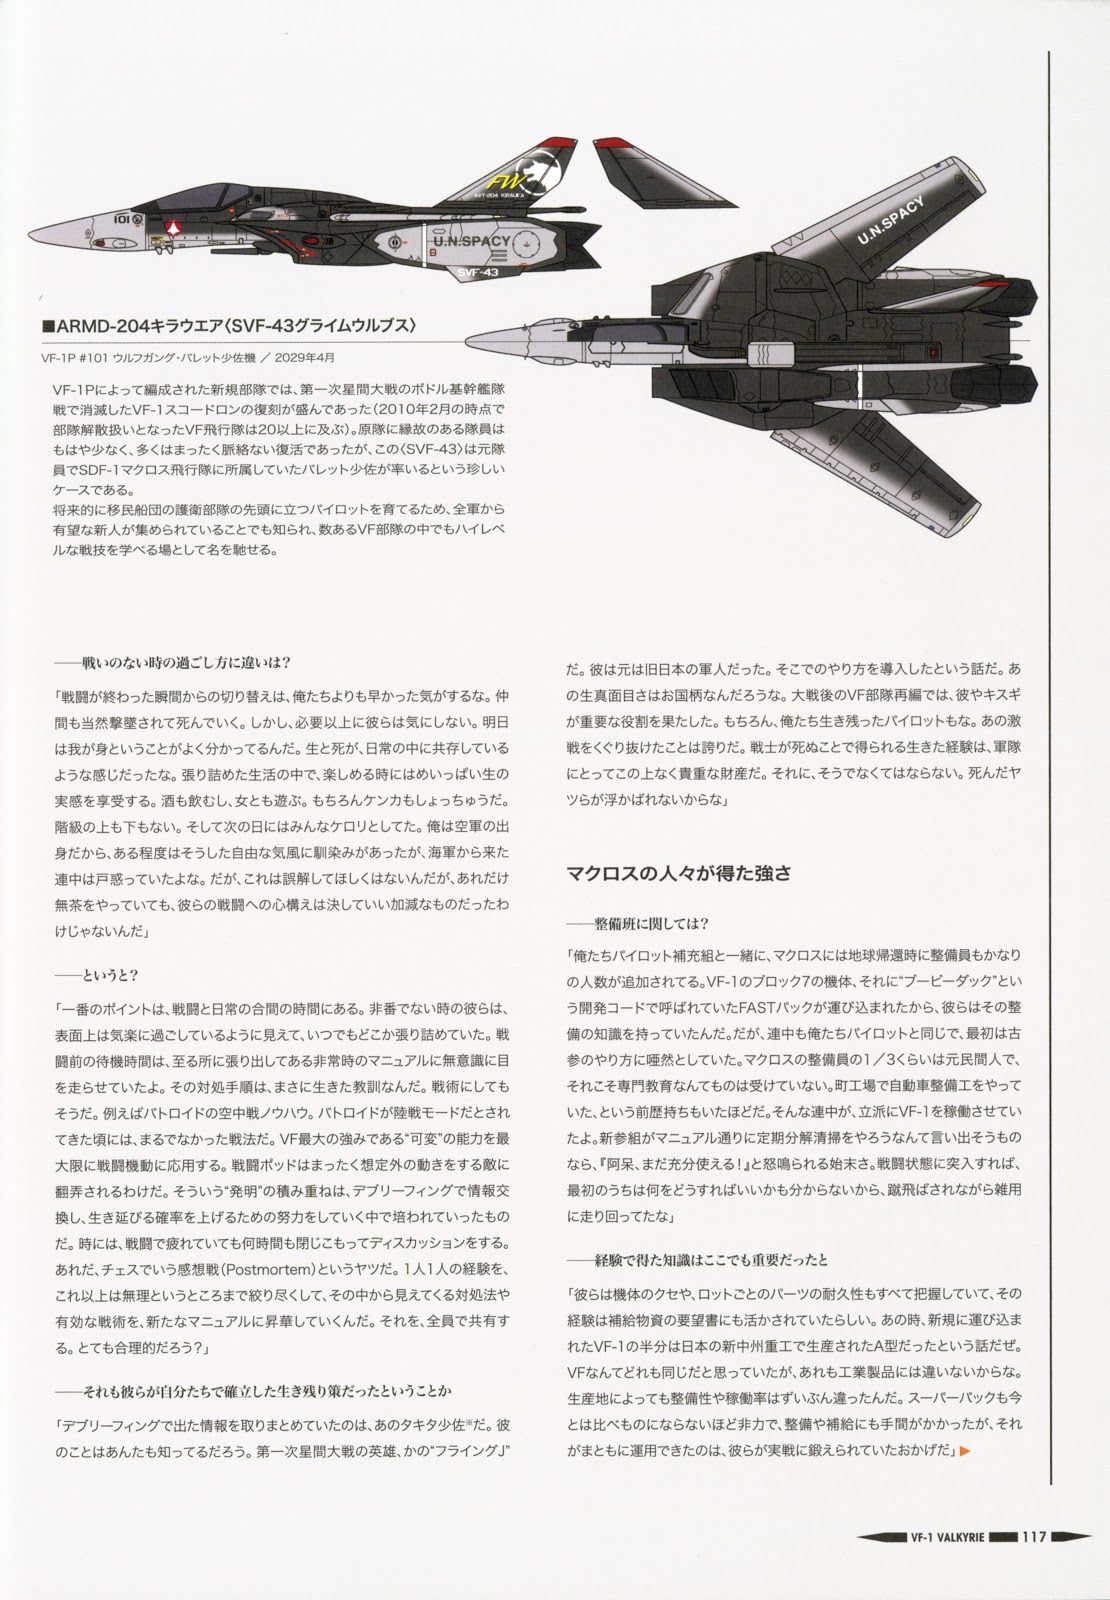 Variable Fighter Master File VF-1 Valkyrie Space Wings